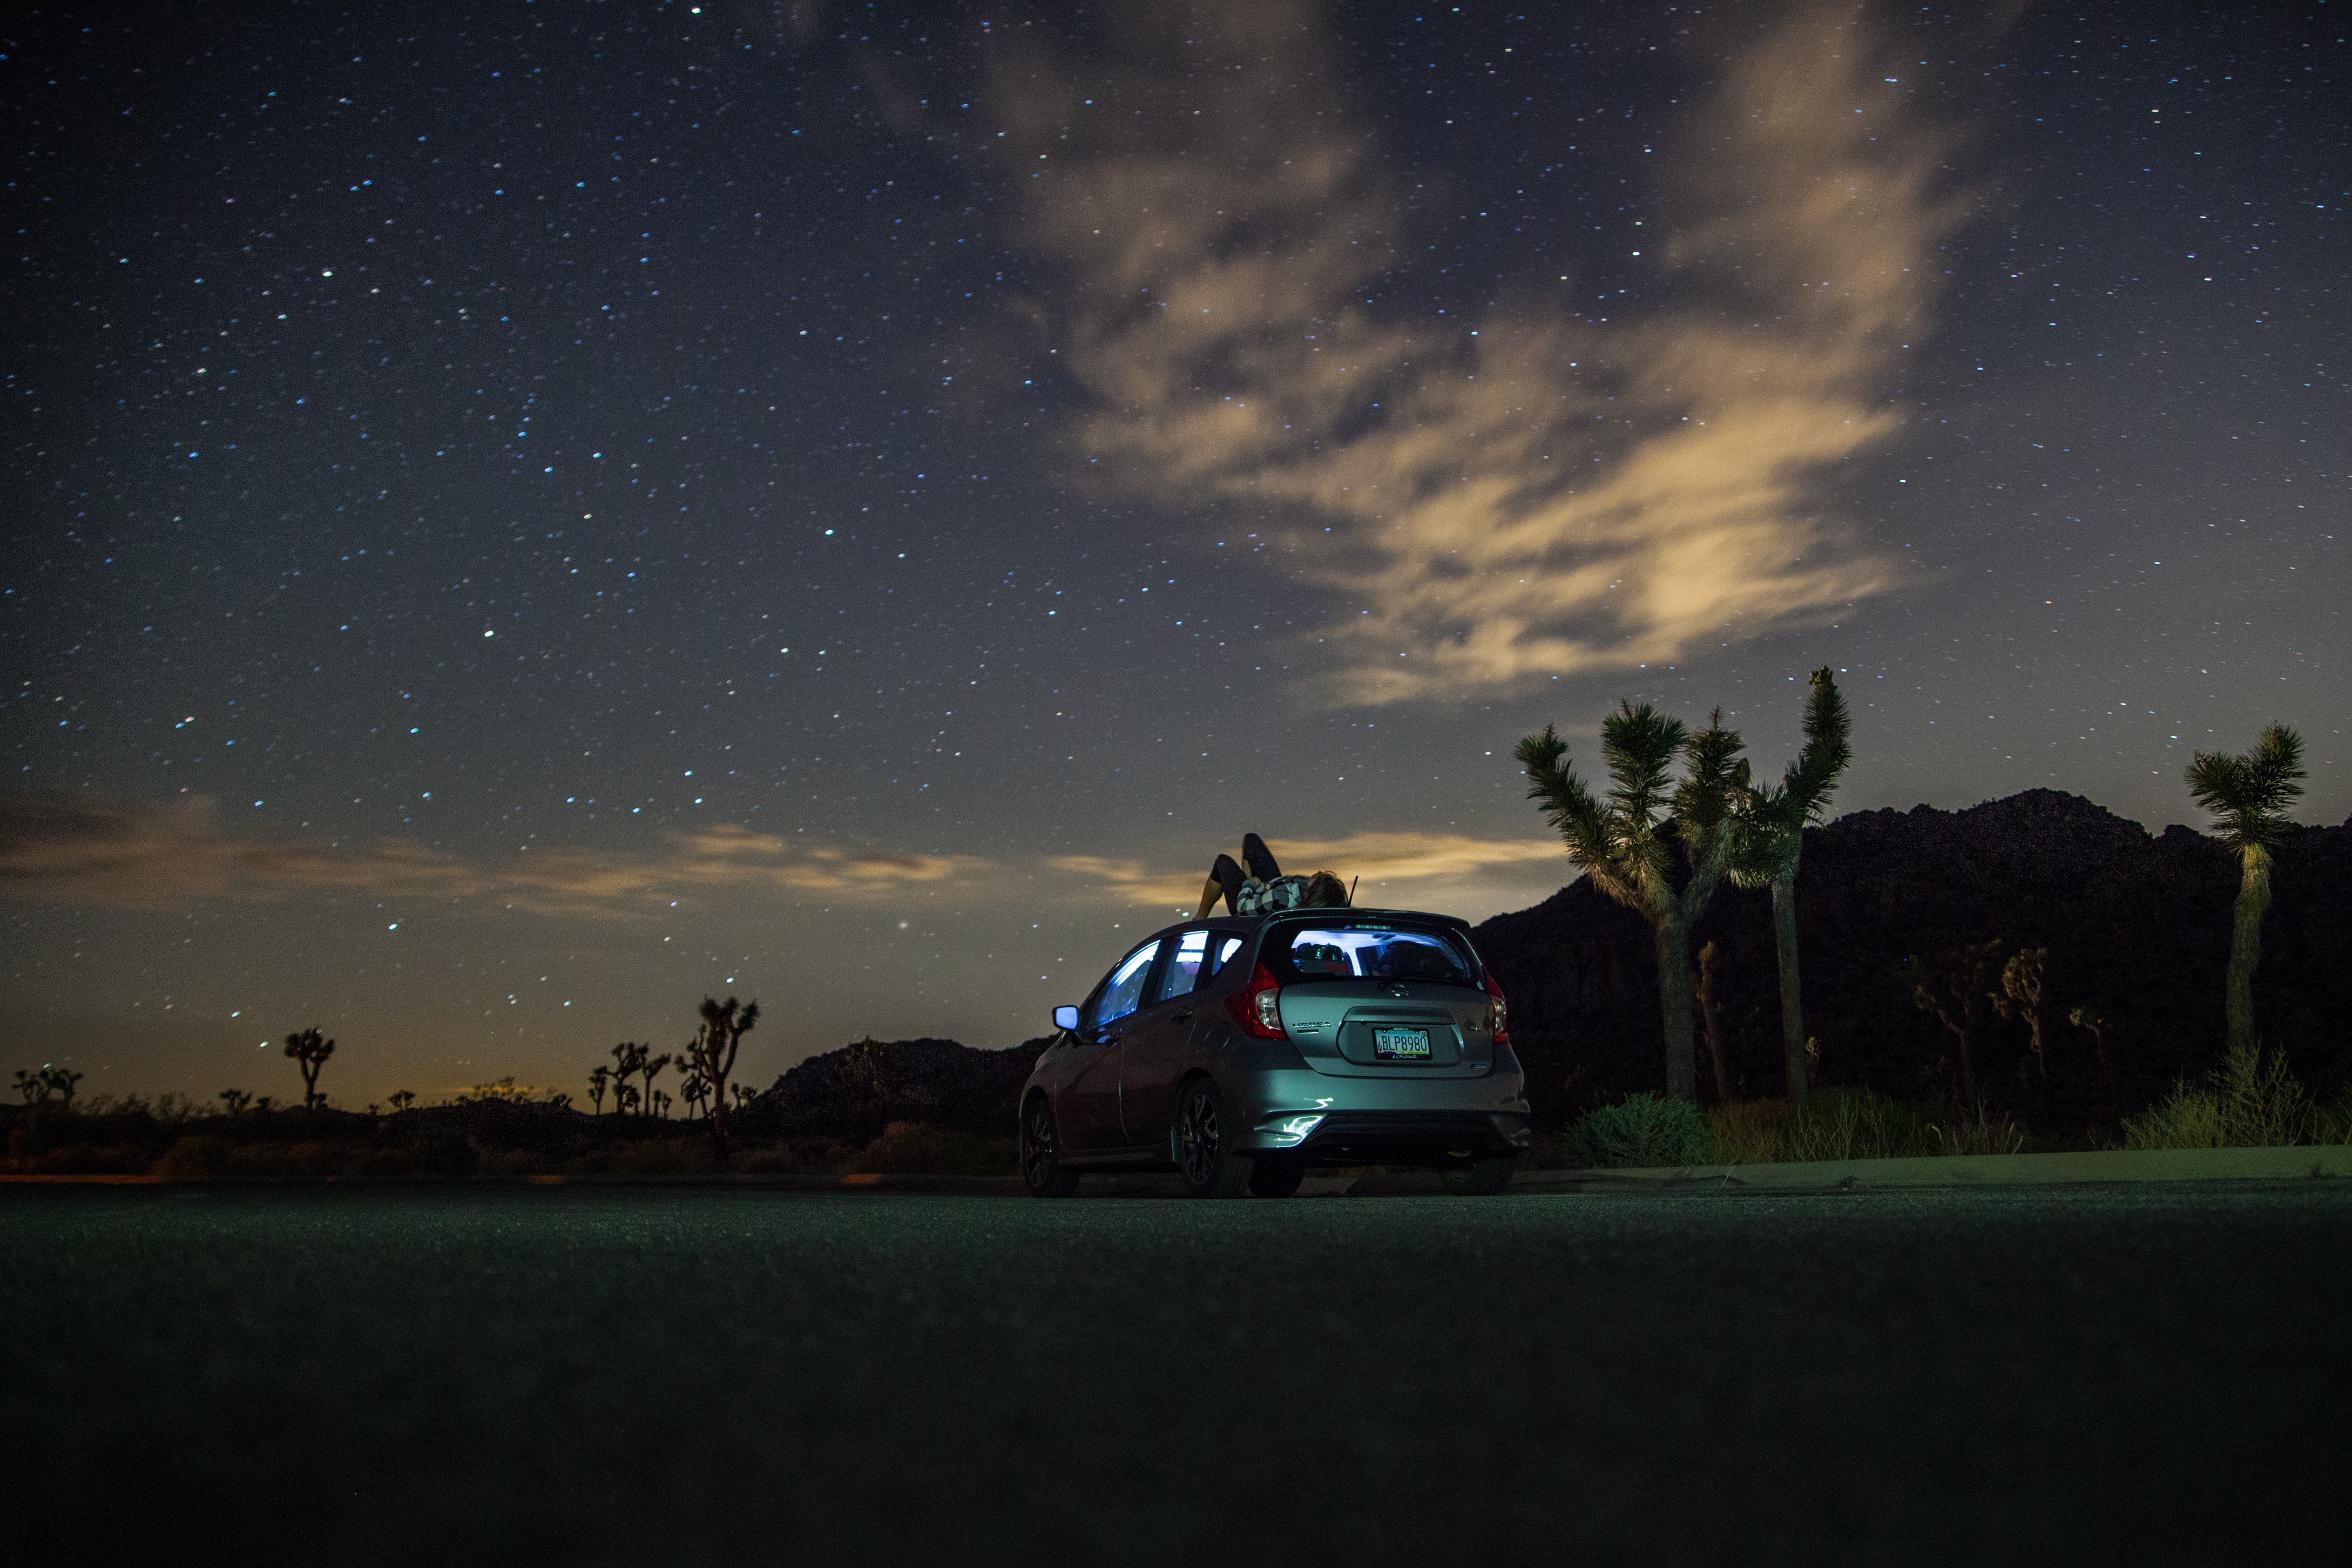 loneliness, palms, cars, privacy, seclusion, car, starry sky, human, person